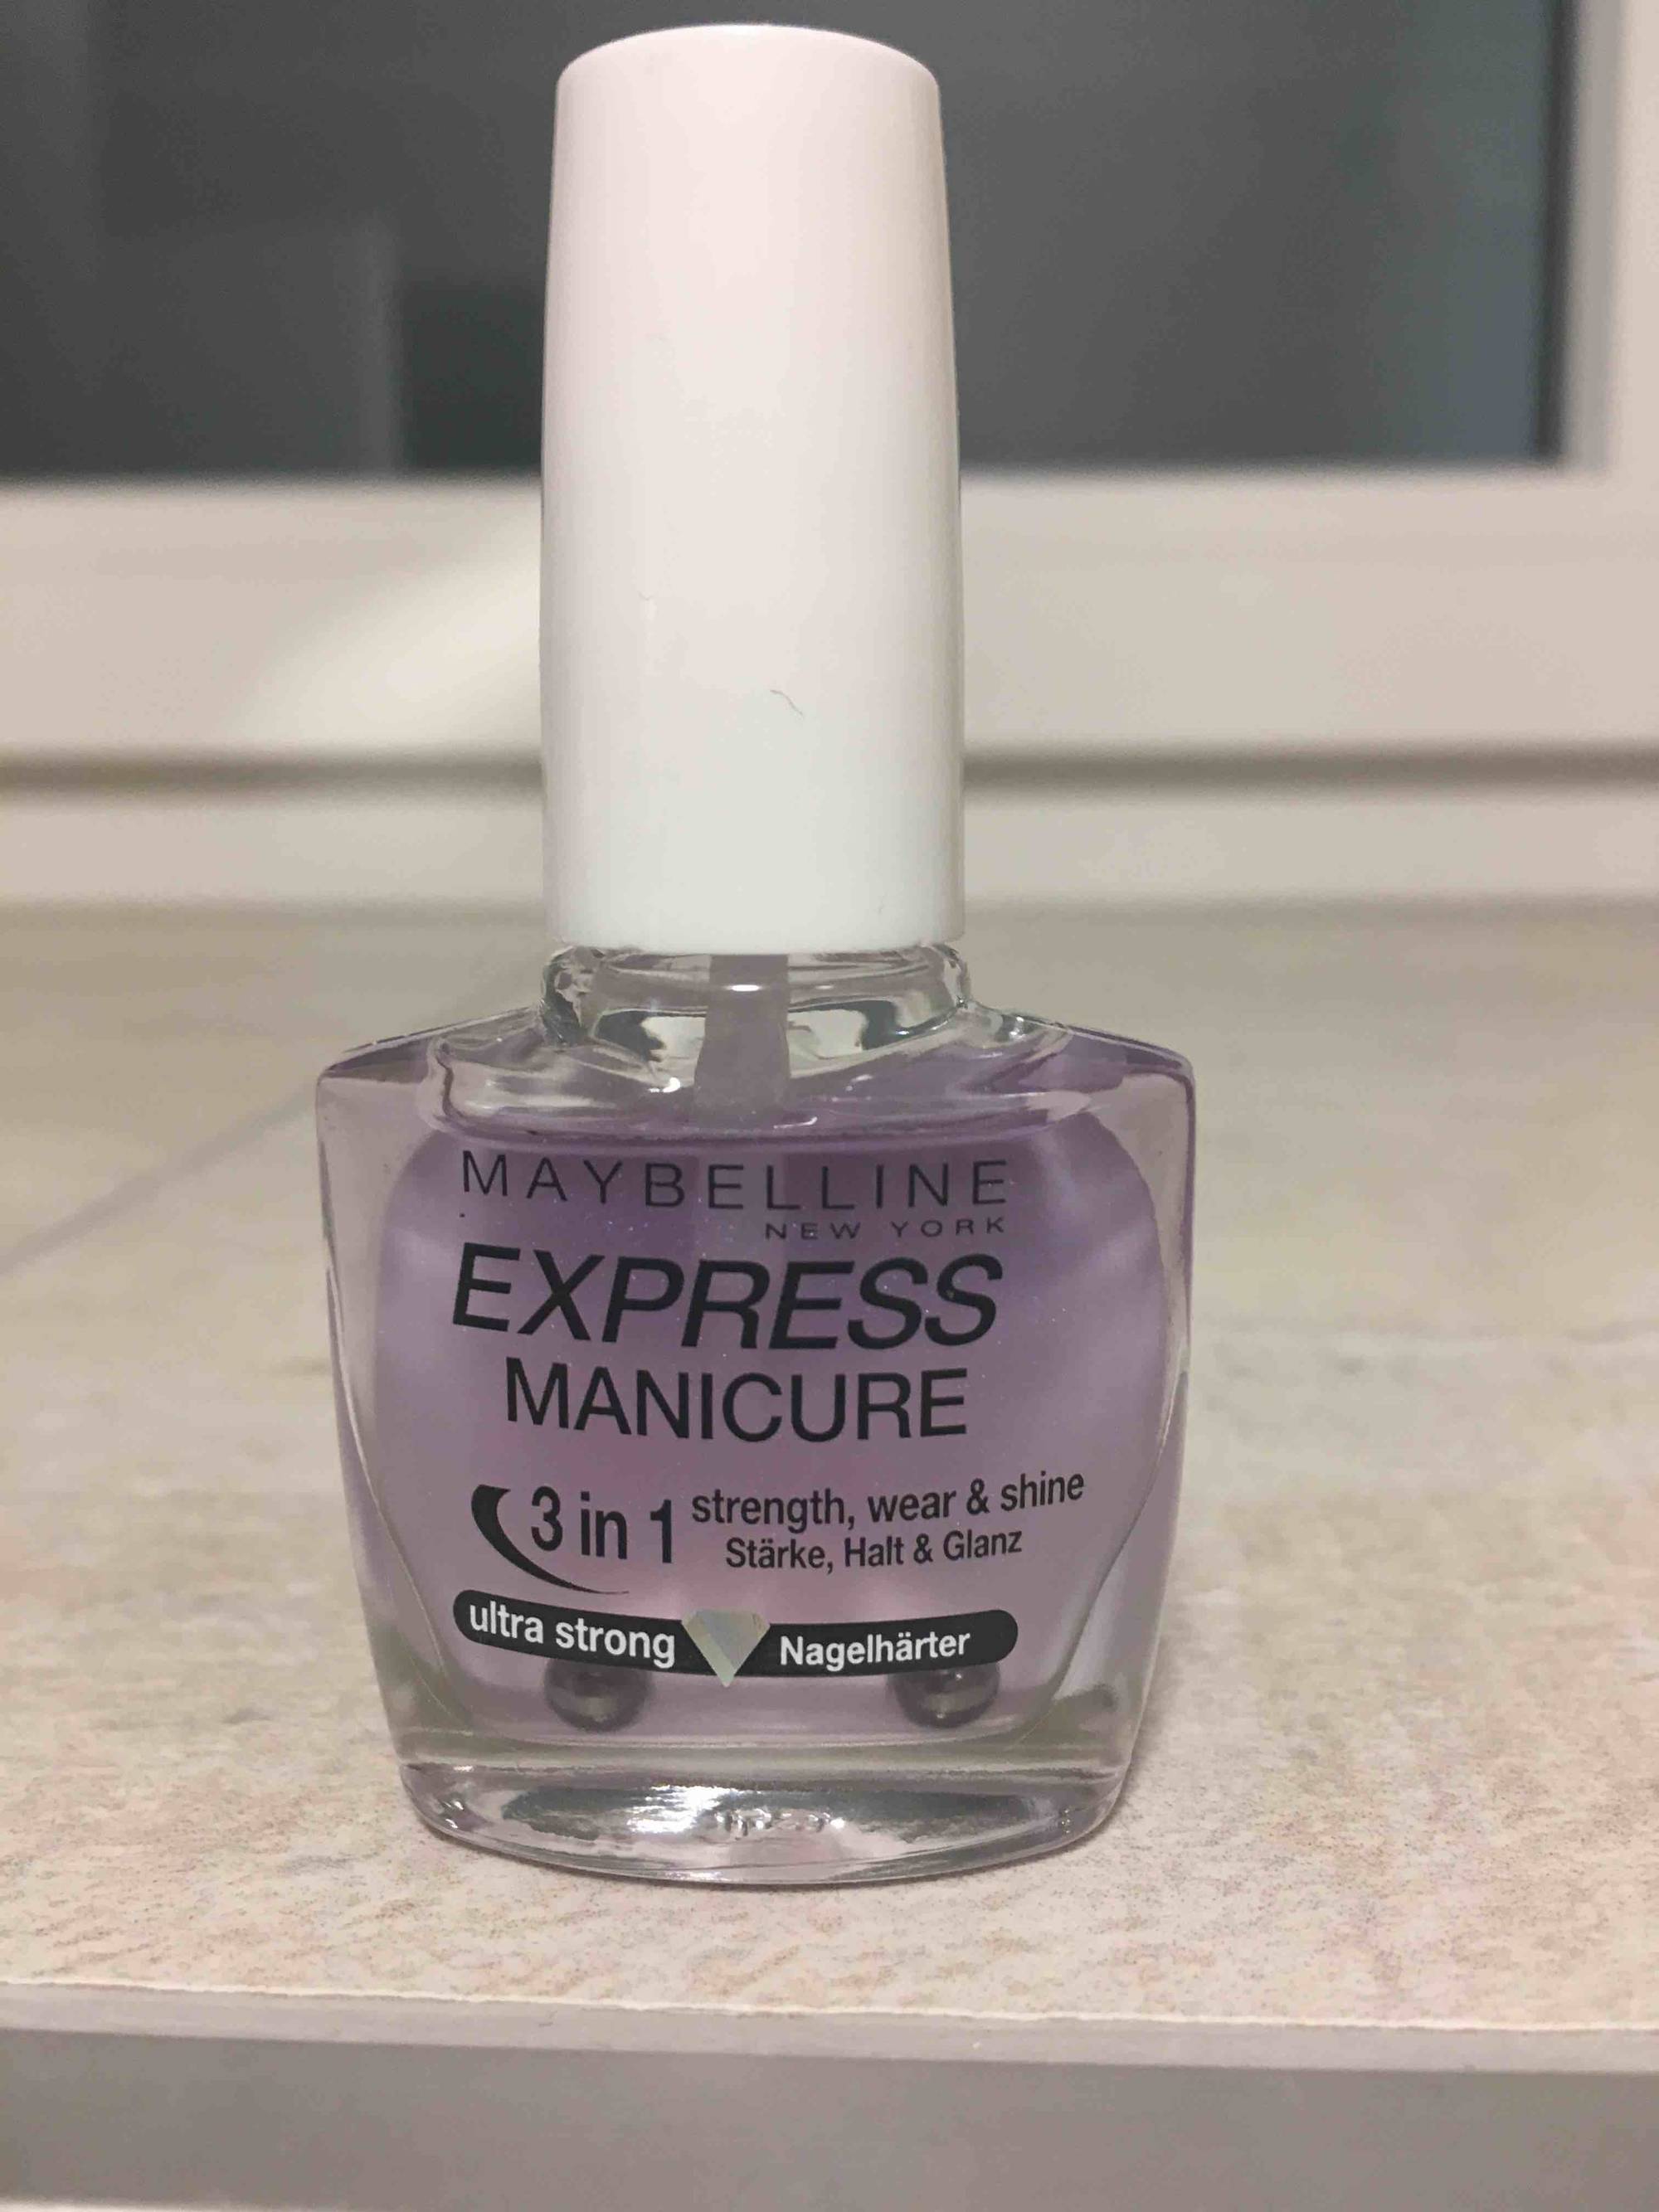 - Composition manicure Express YORK MAYBELLINE 1 Choisir Ultra 3 in - strong UFC-Que NEW